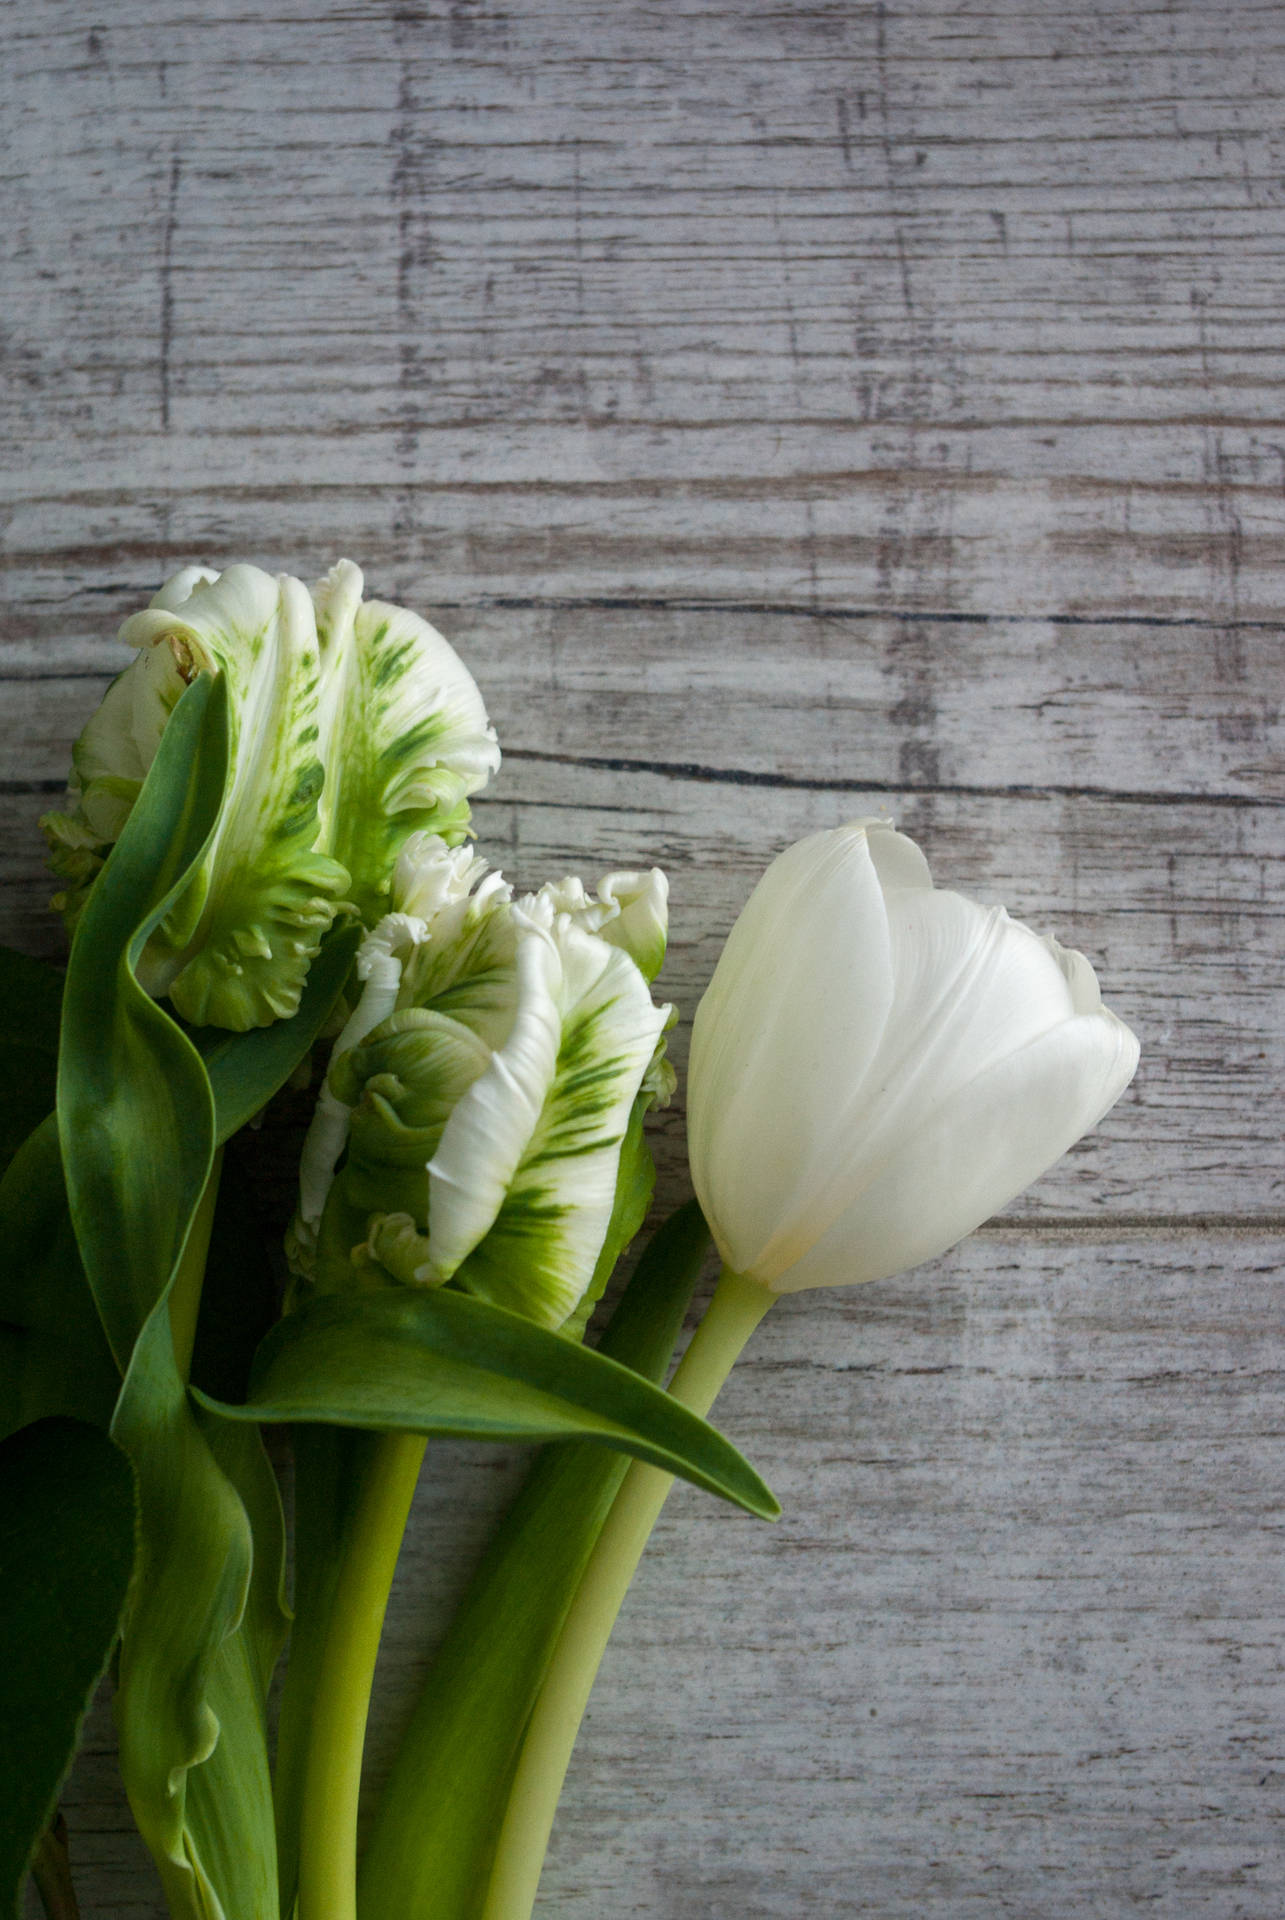 Enjoy The Beauty Of Nature With These White Tulips In A Lush Green Aesthetic. Background